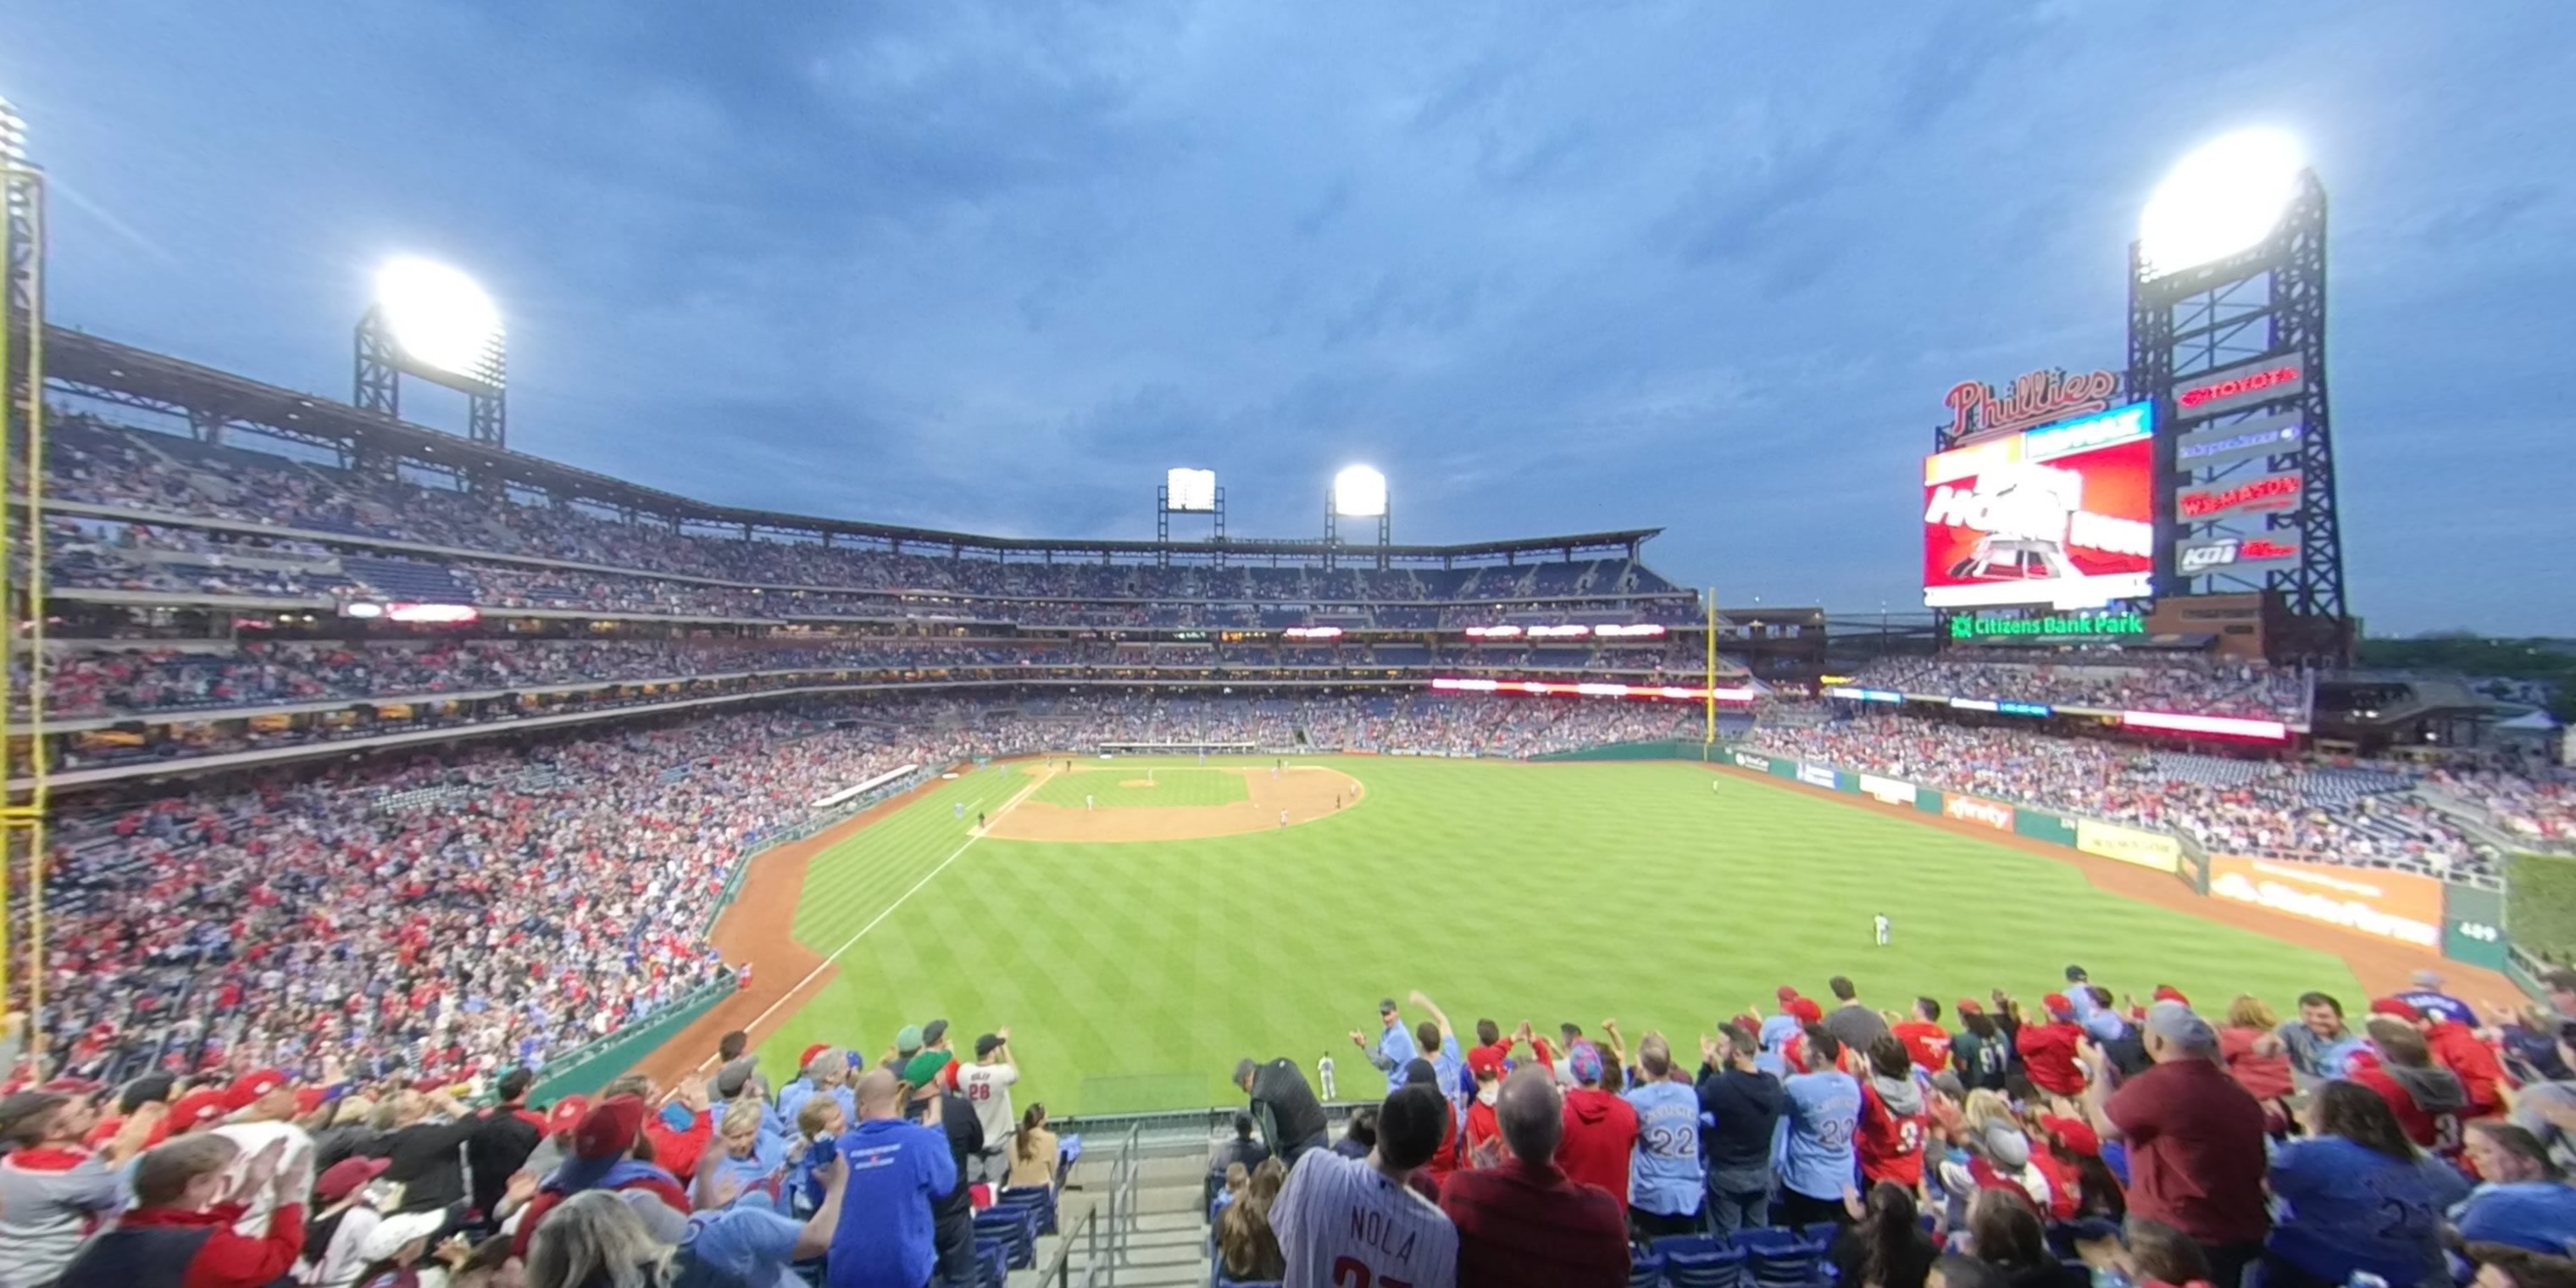 section 203 panoramic seat view  for baseball - citizens bank park